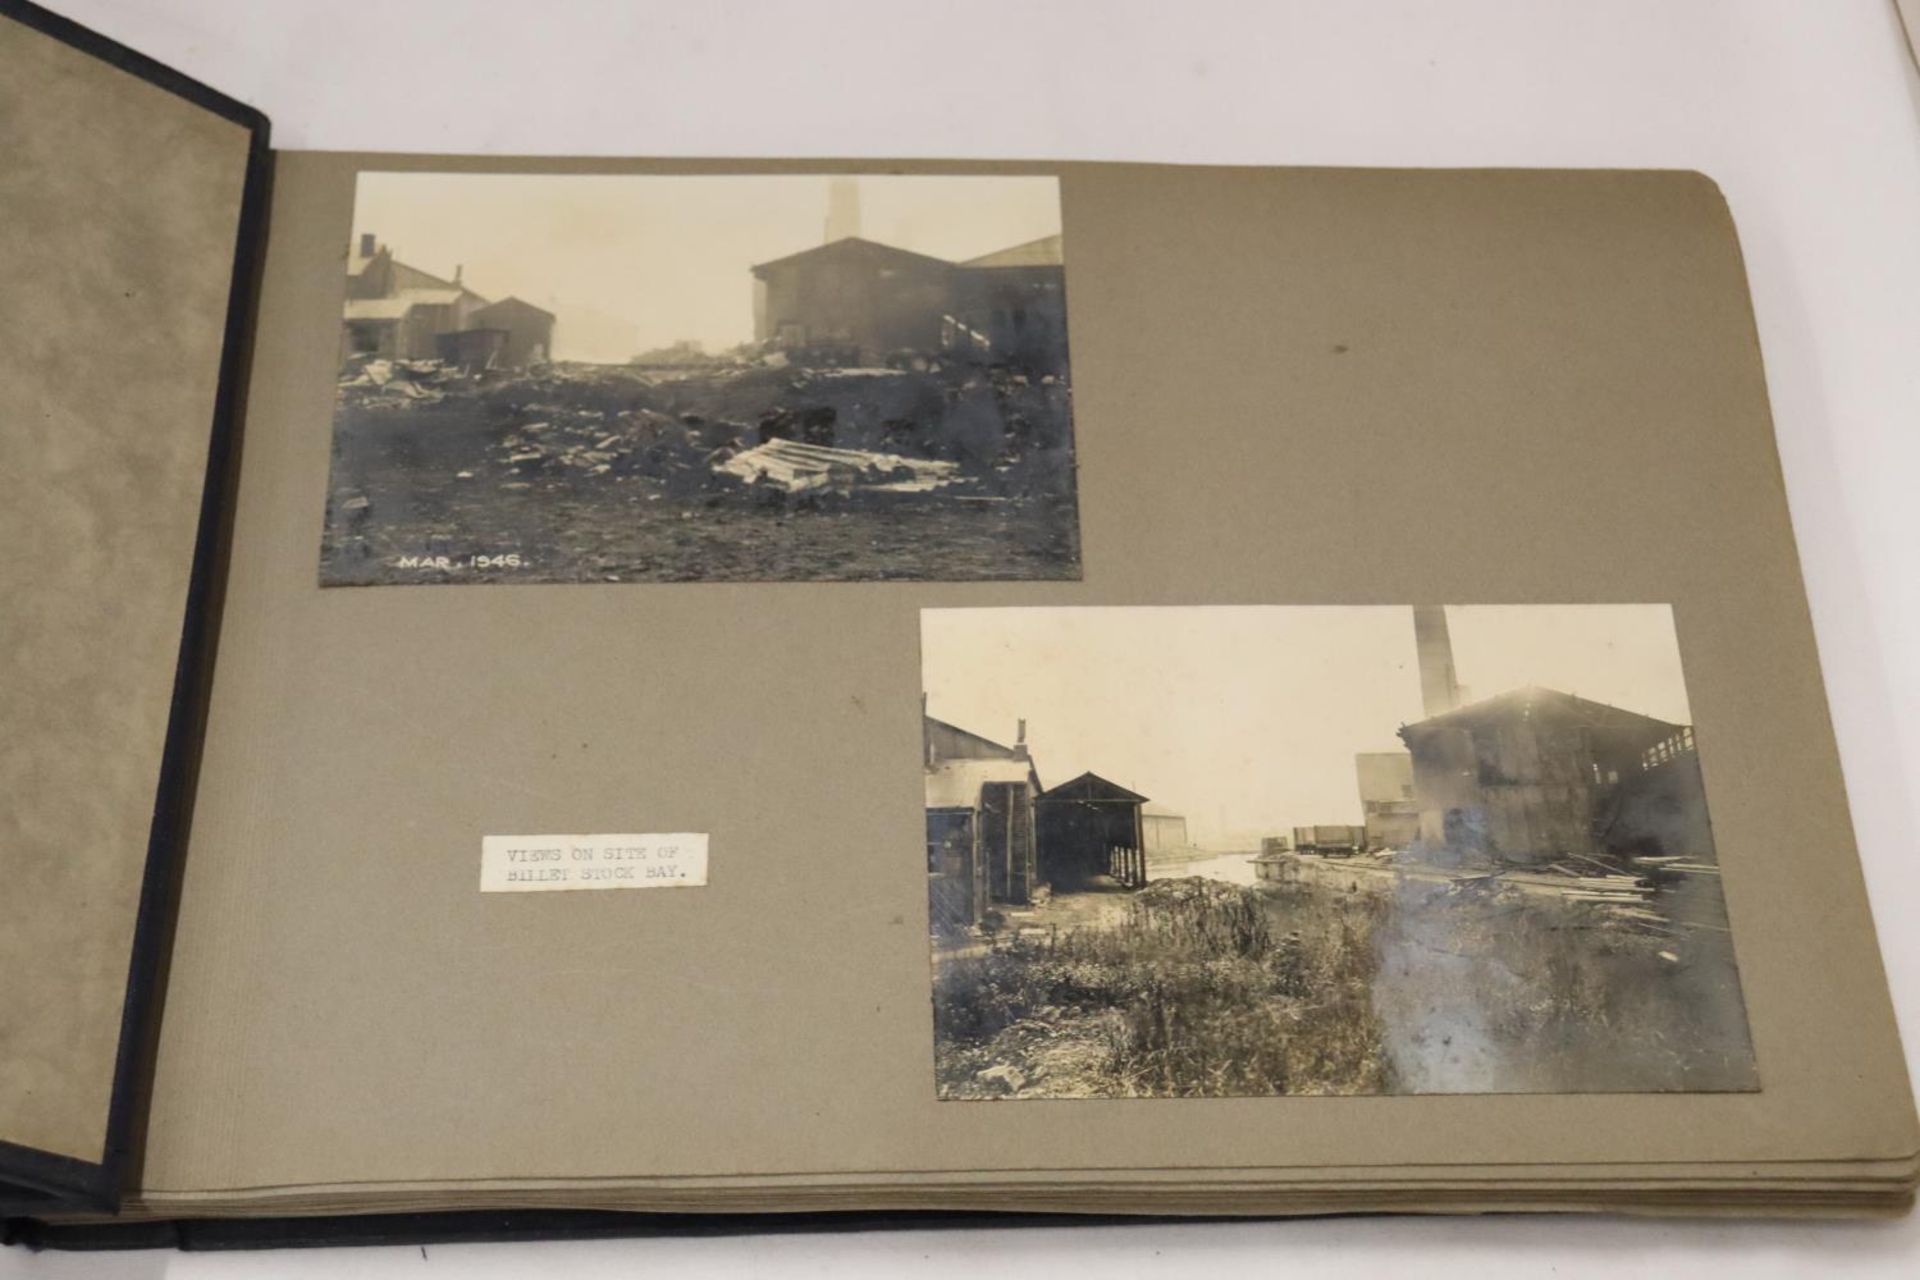 AN INDUSTRIAL PHOTO ALBUM FROM 1946 FULL OF POST WAR RENOVATIONS